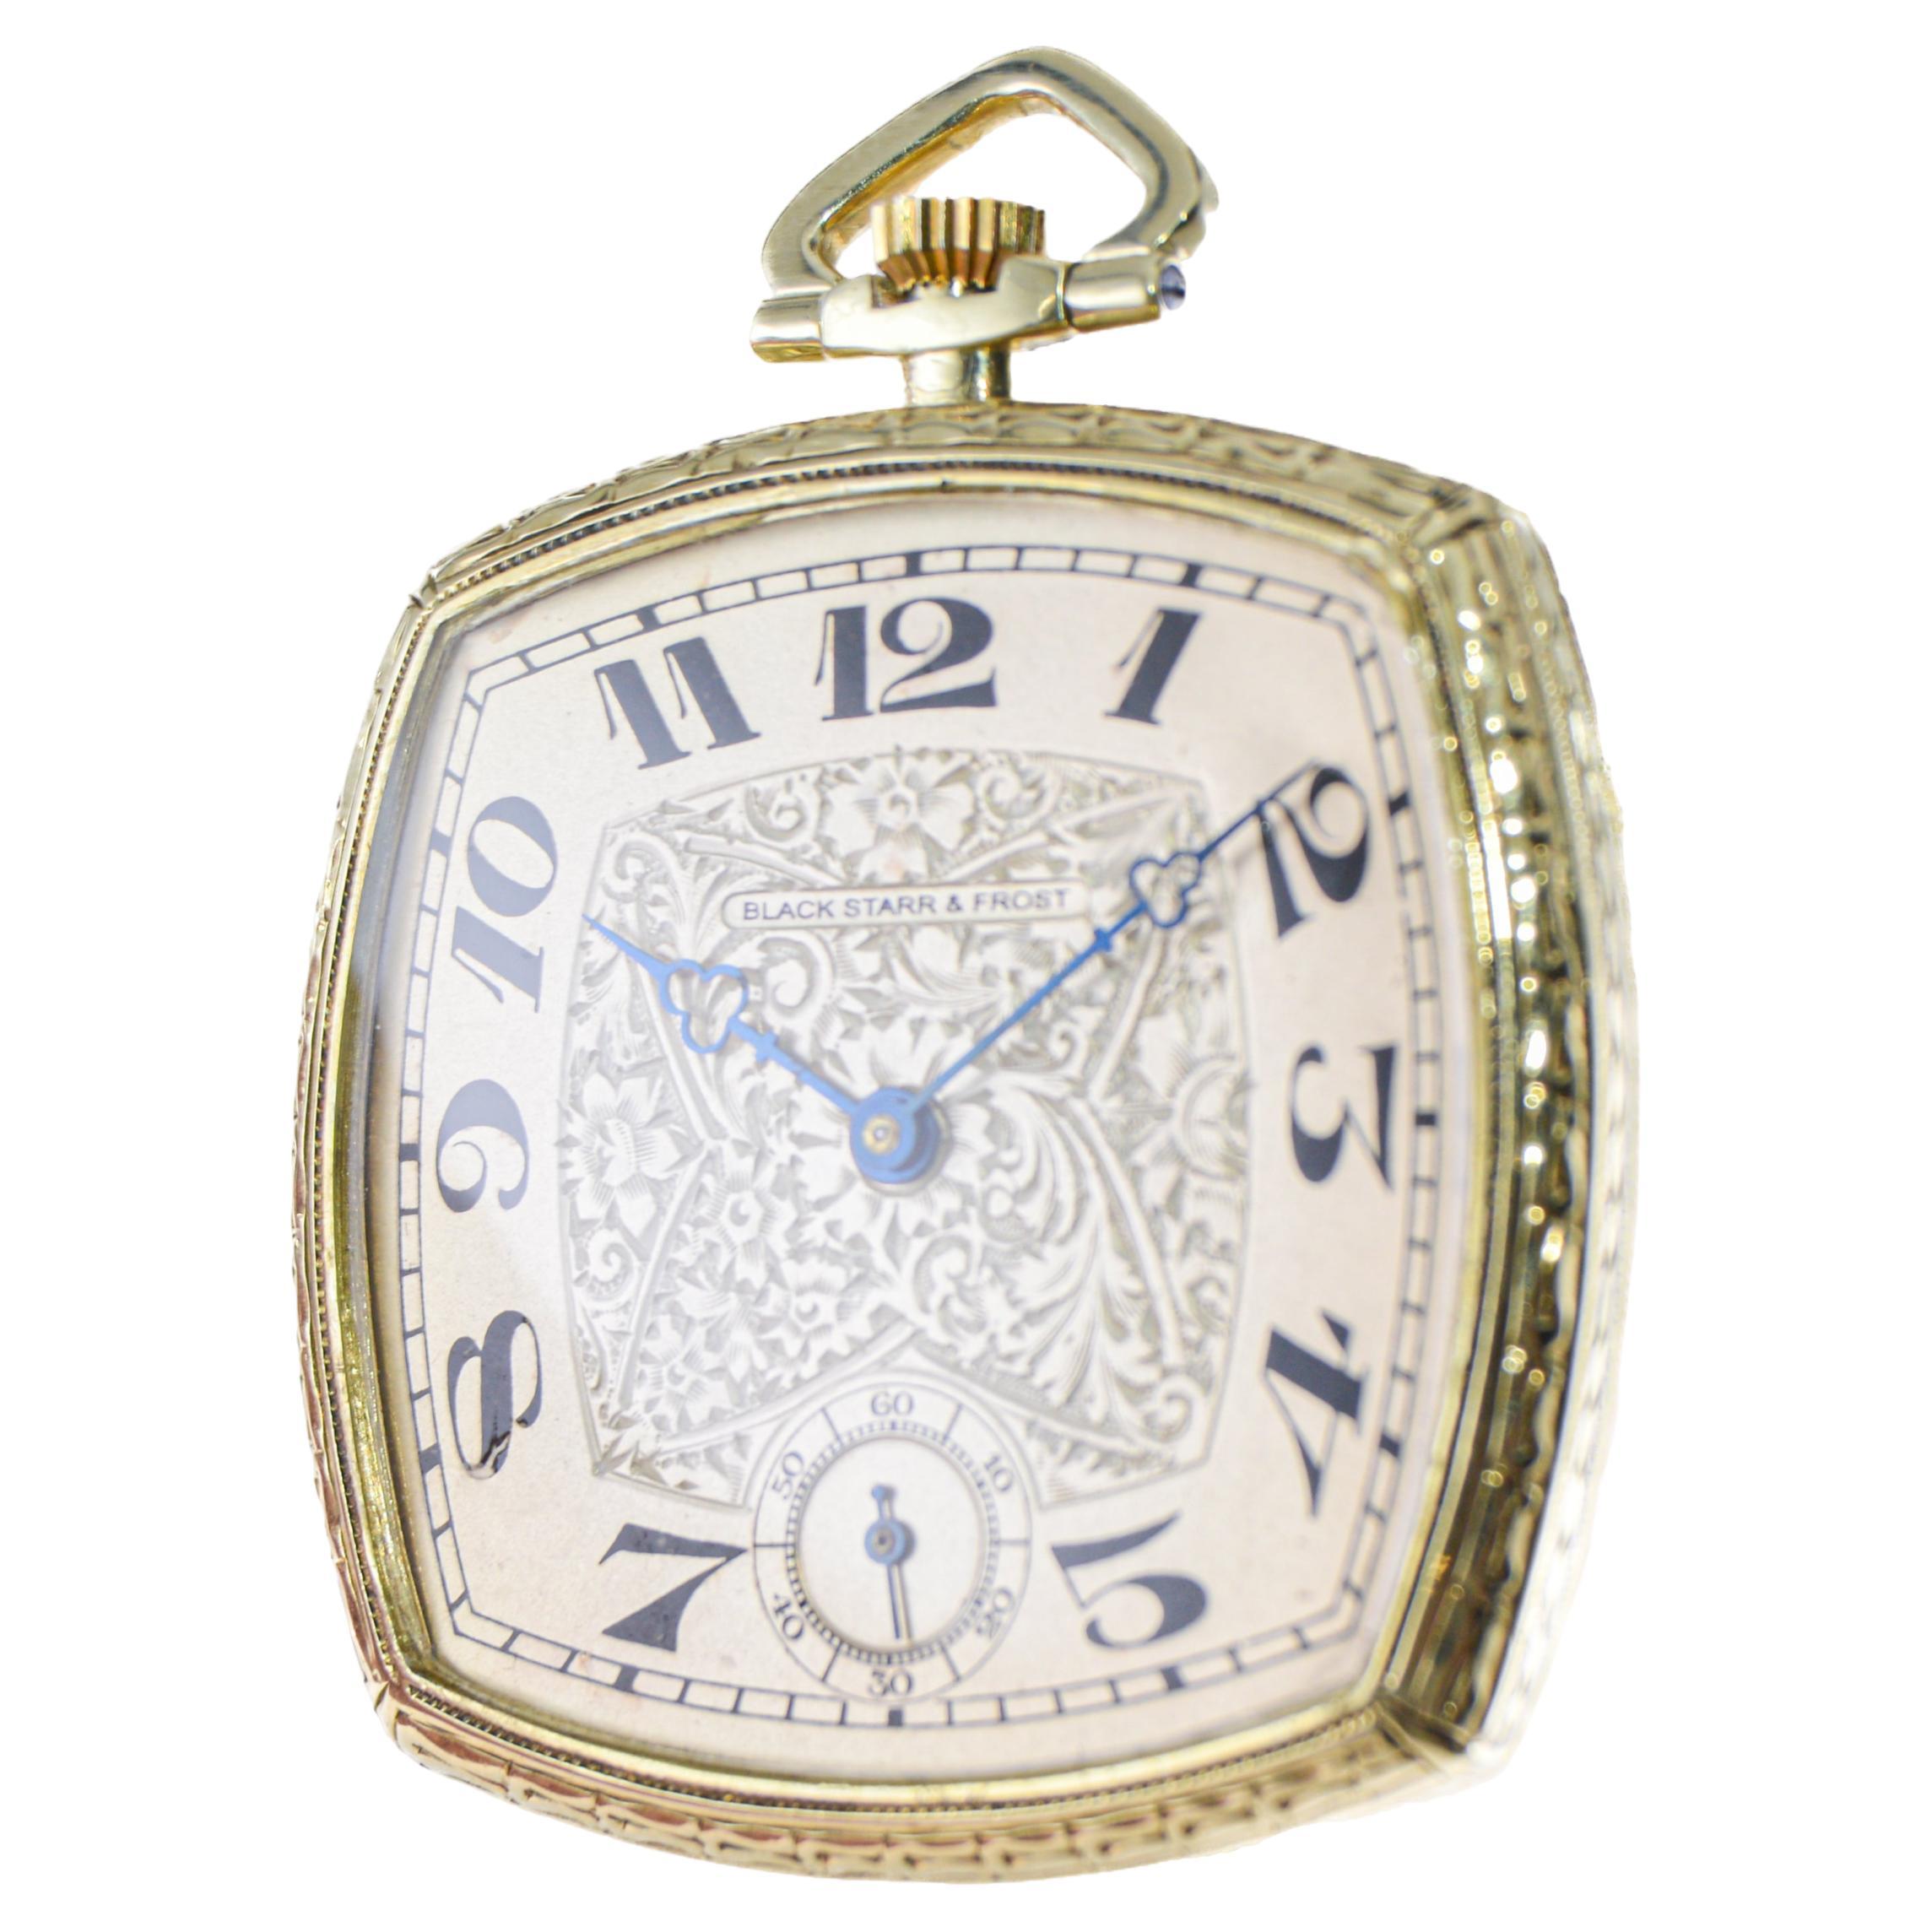 Black Starr & Frost 14 Karat Gold Art Deco Pocket Watch with Engraved Dial  For Sale 3